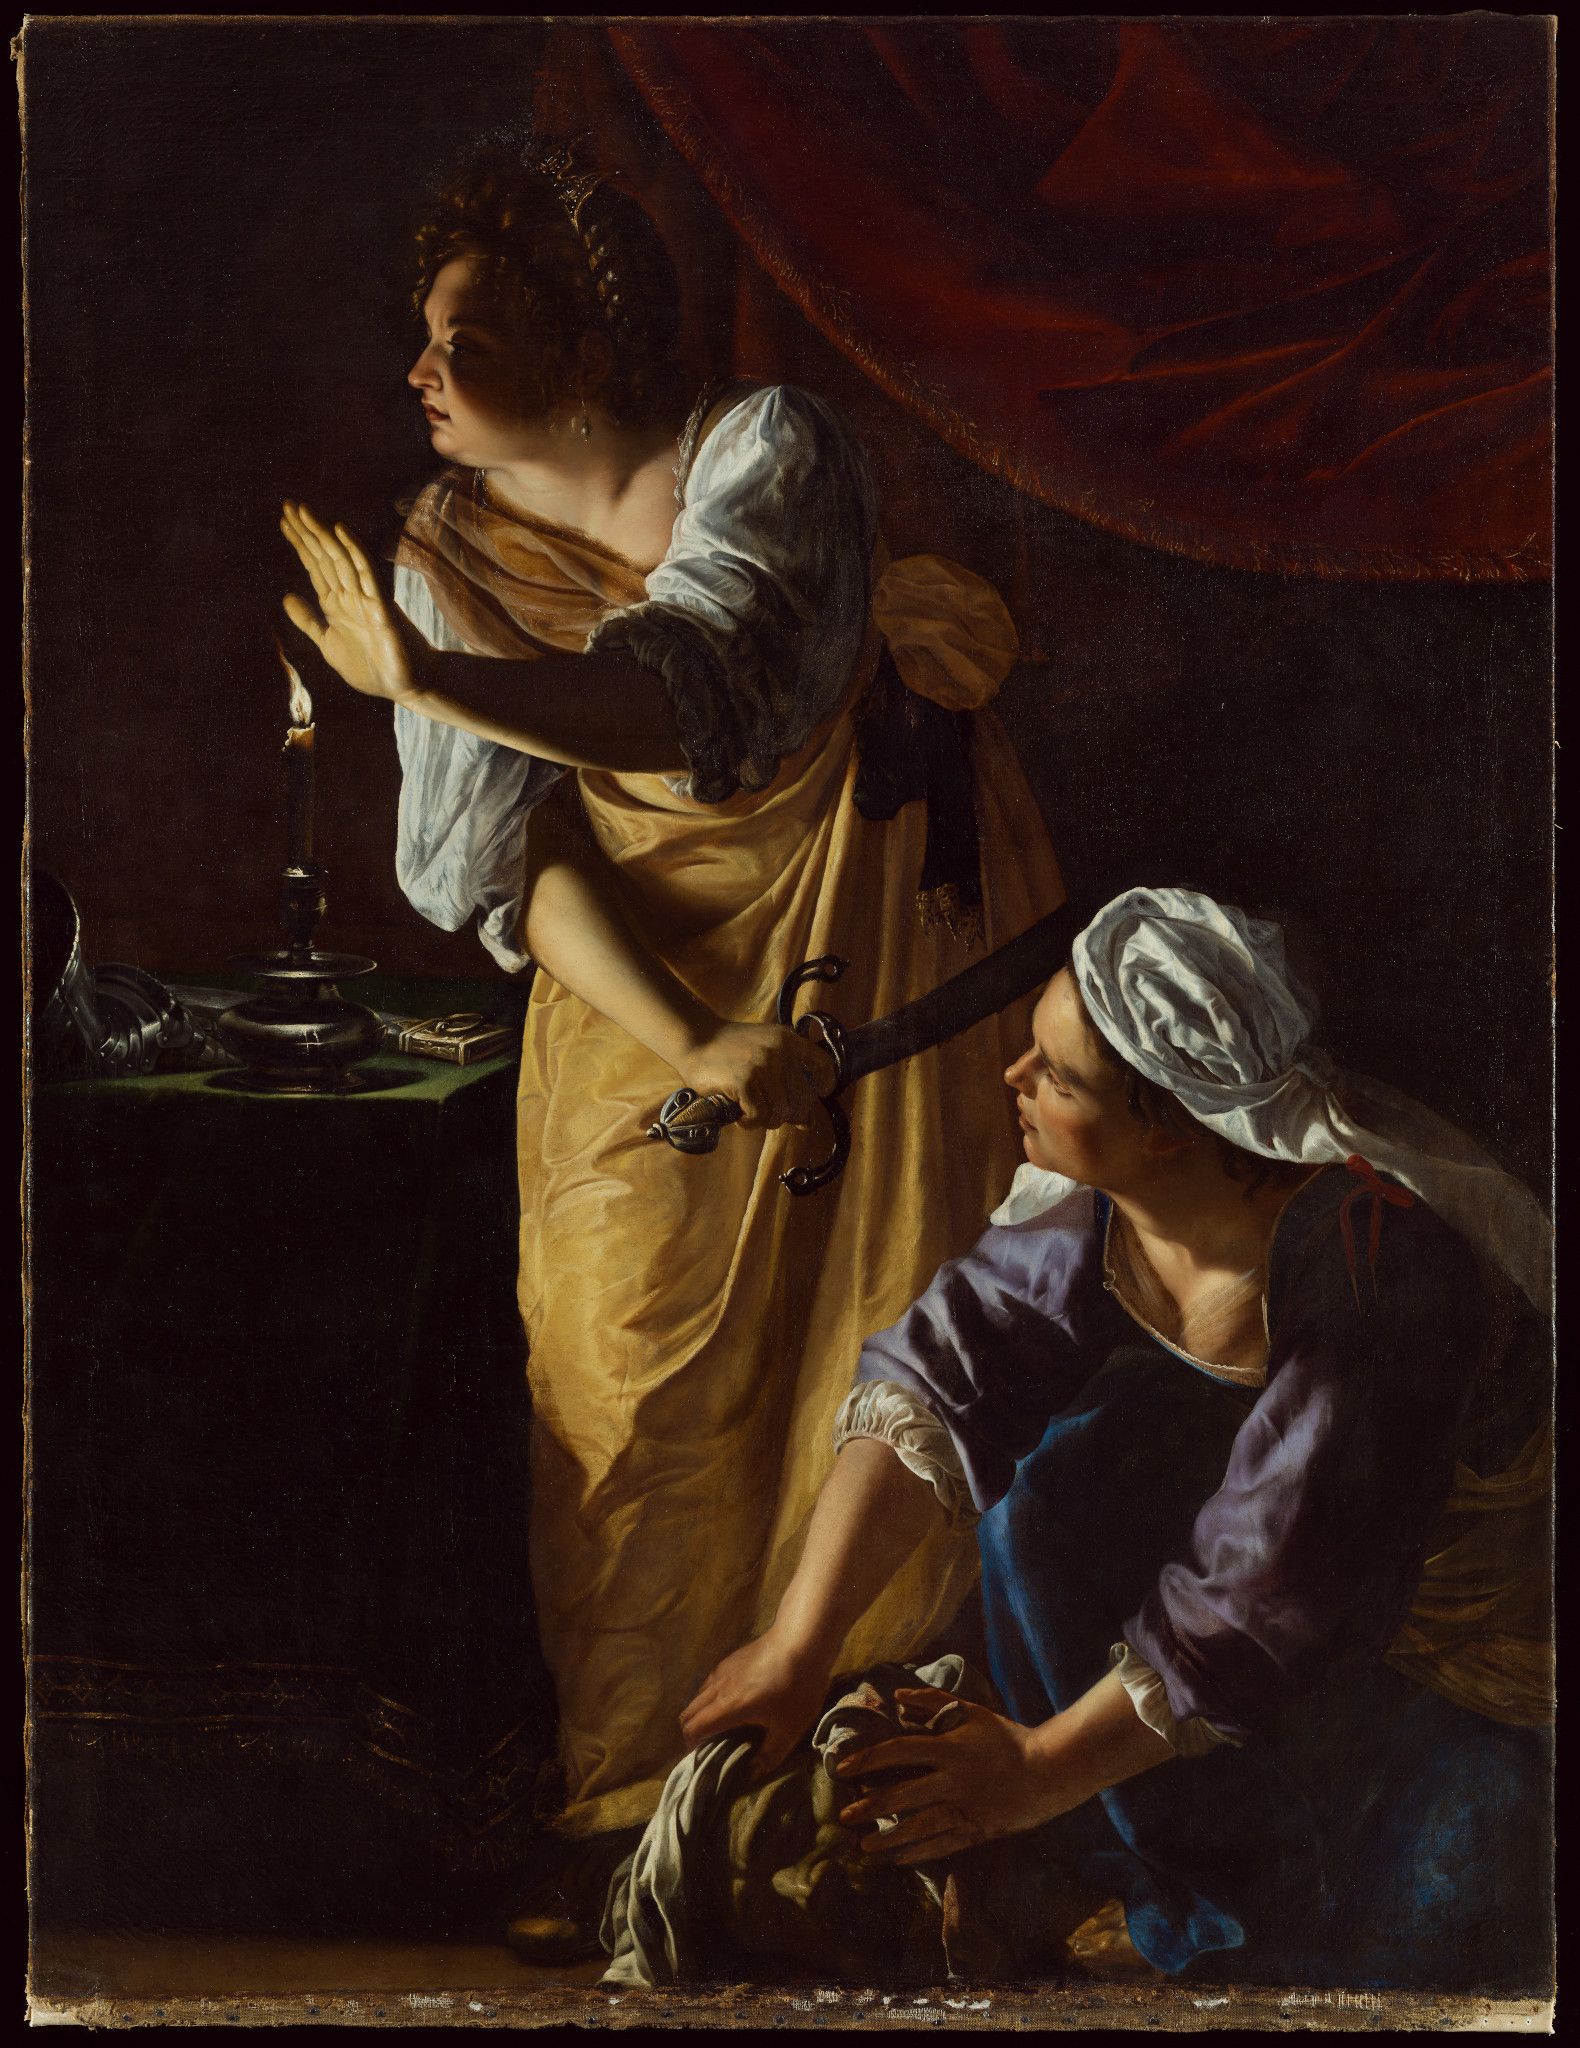 An oil painting from the early 1600s of two light skinned women. One woman stands with her hand outstretched illuminated by a candle on the table next to her. In her other hand she holds a sword with an intricate handle. She is wearing a yellow and white dress and has a jeweled tiara on her head. The other woman is bending down to the floor holding the severed head of a middle aged man in her hands. She is wearing a blue and white dress with white fabric tied around her head.